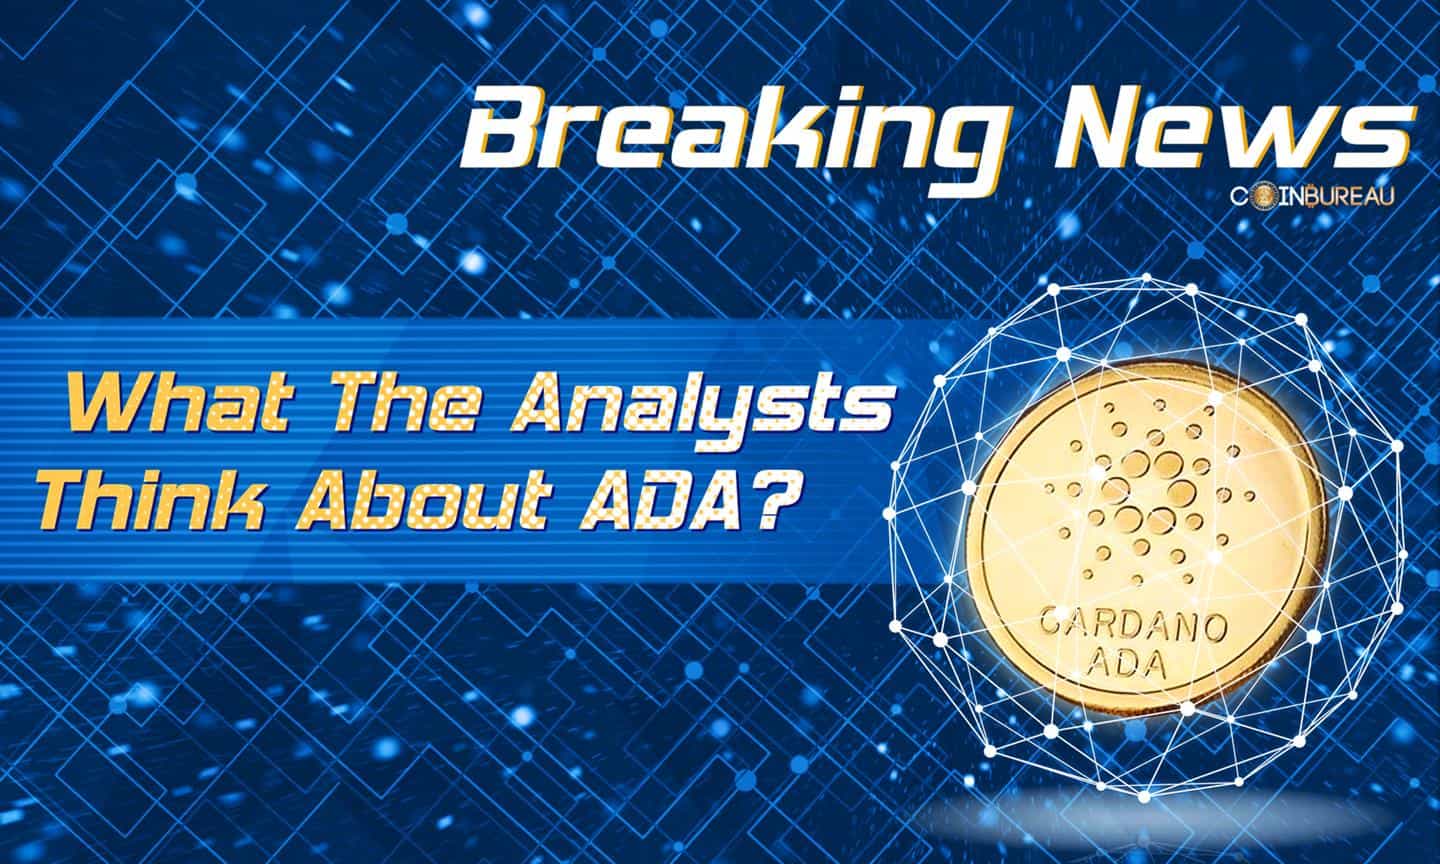 Is It Time For Cardano to Pop? Here’s What The Analysts Think About ADA